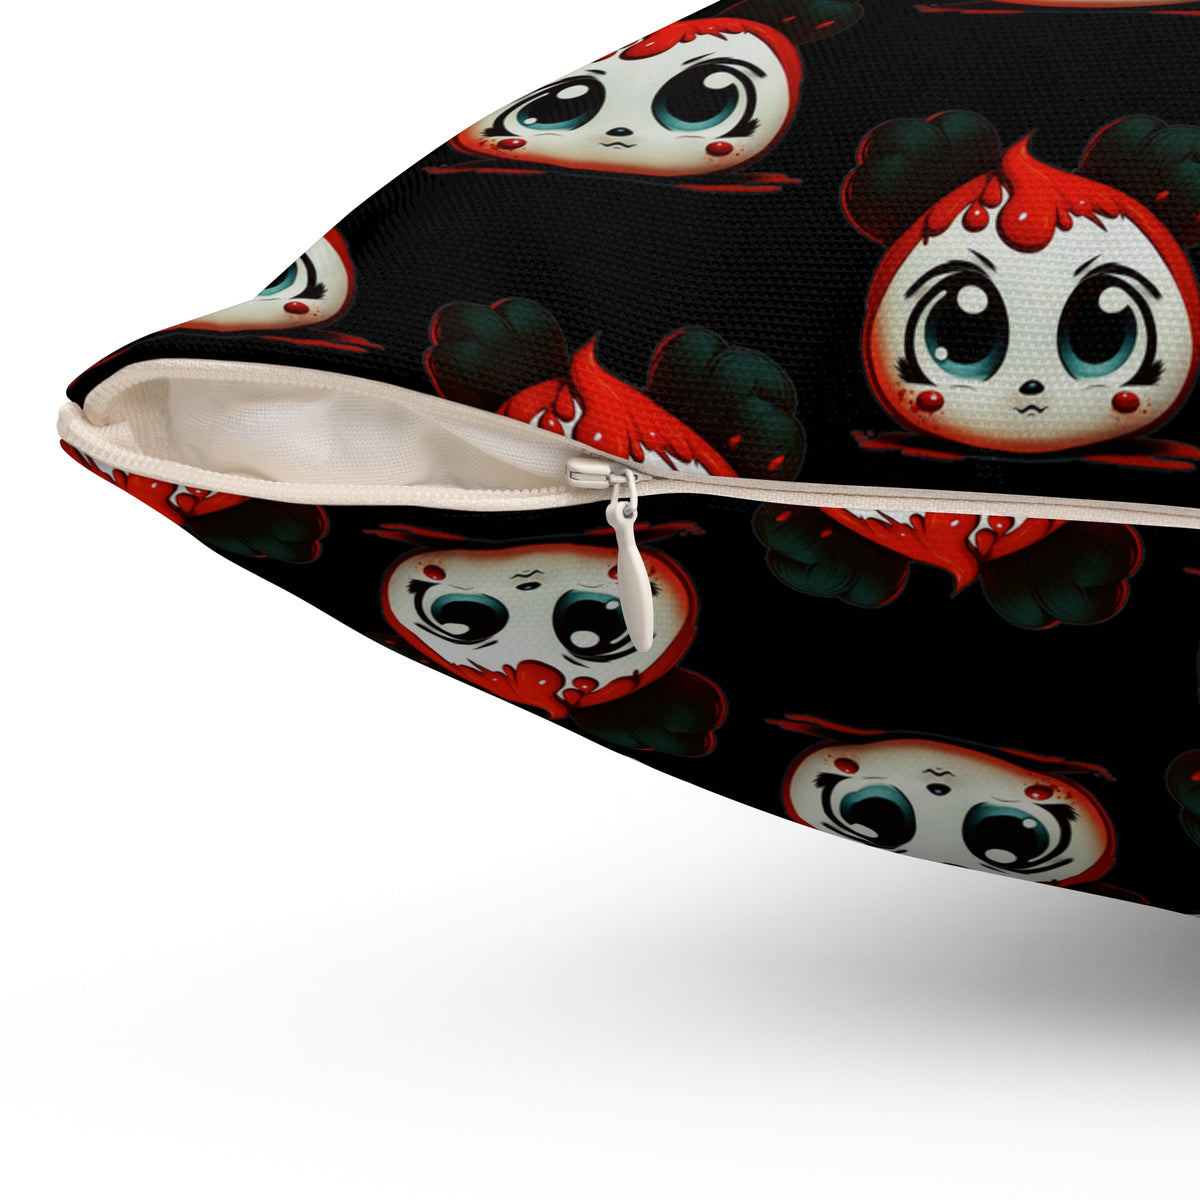 Double-Sided Killer Clown Dumpling Pattern Pillow - Unique and Eye-Catching Decor